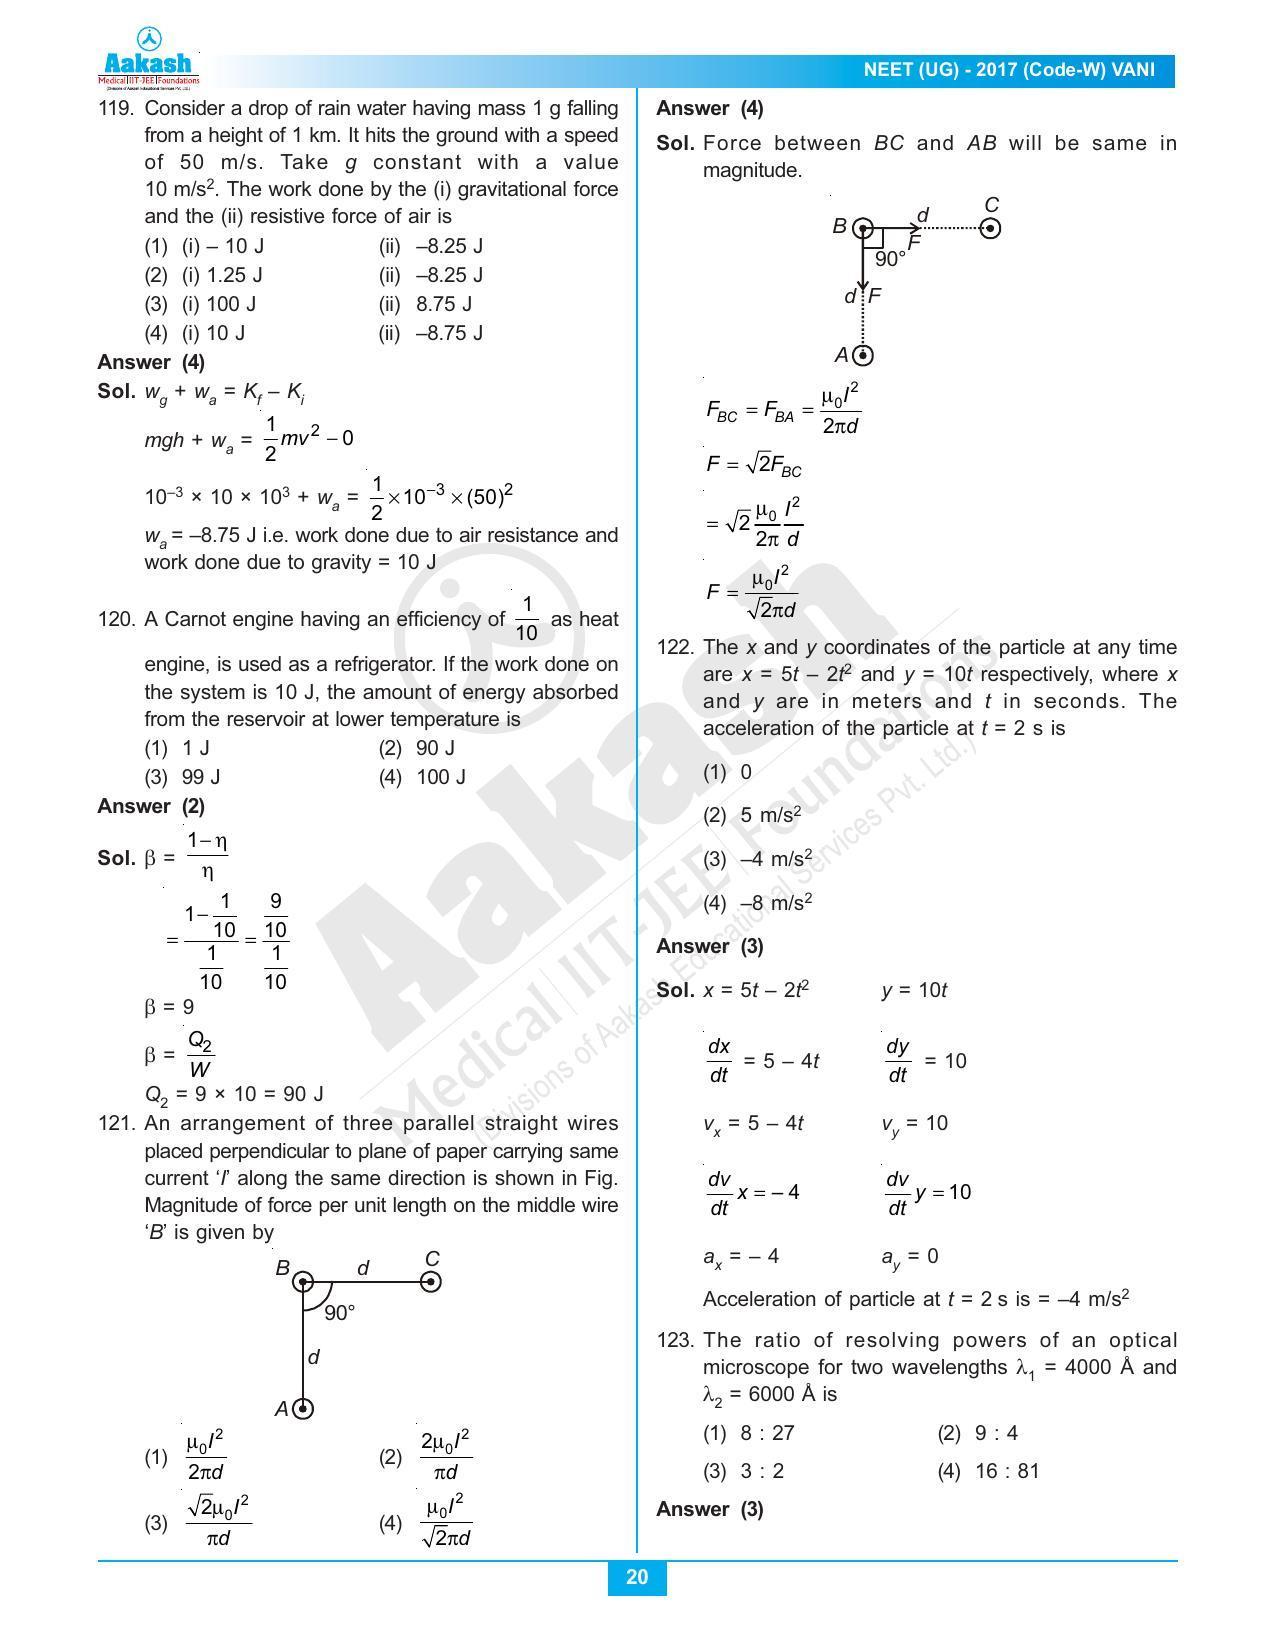  NEET Code W 2017 Answer & Solutions - Page 20